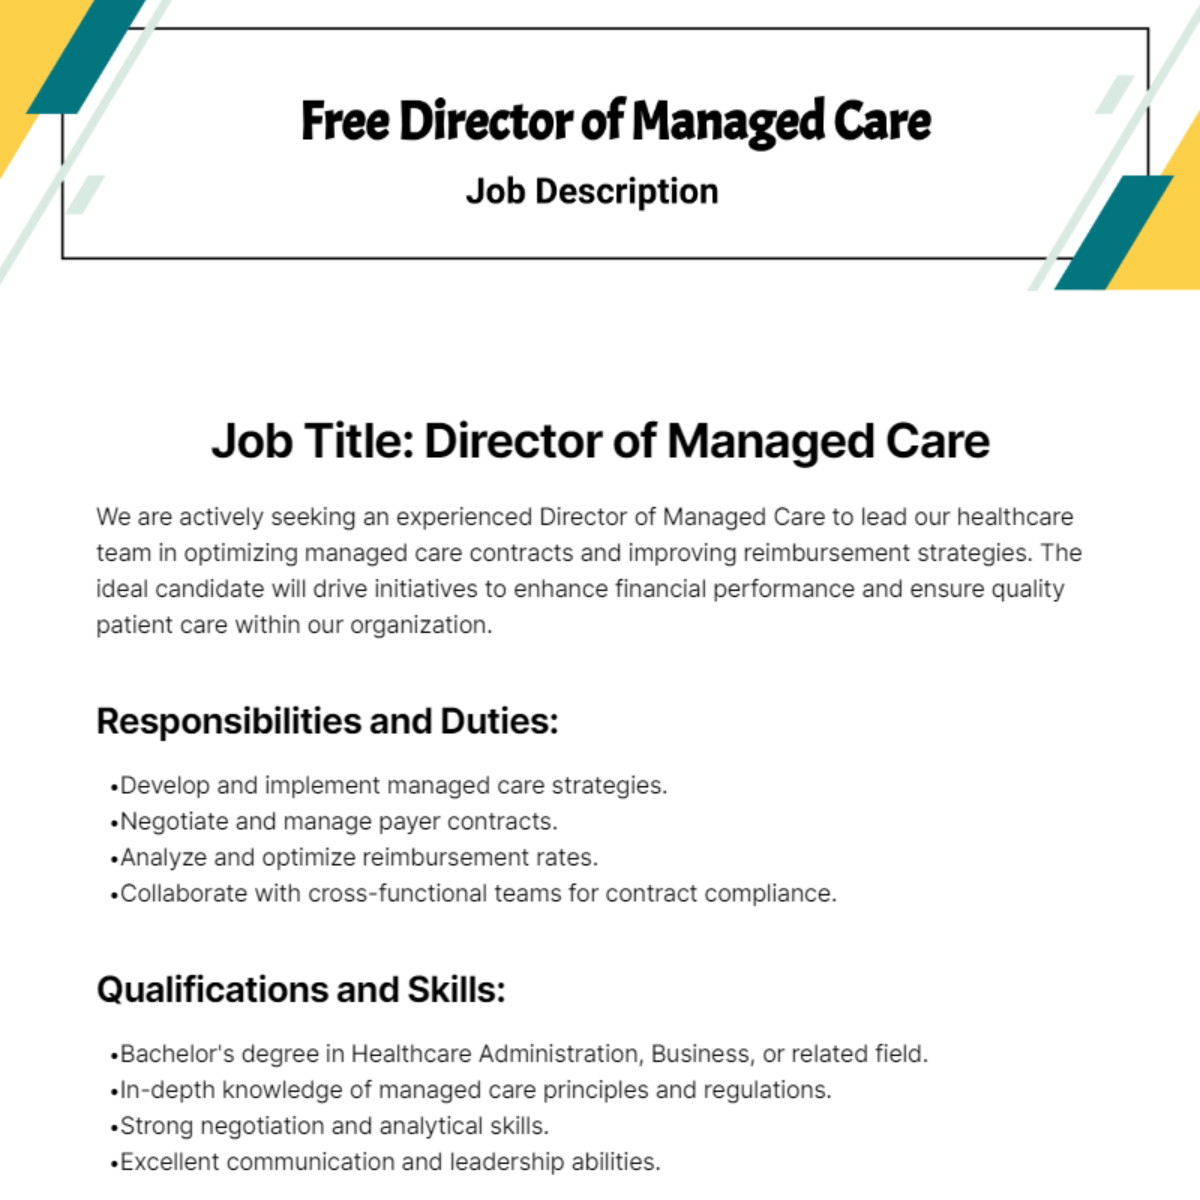 Free Director of Managed Care Job Description Template